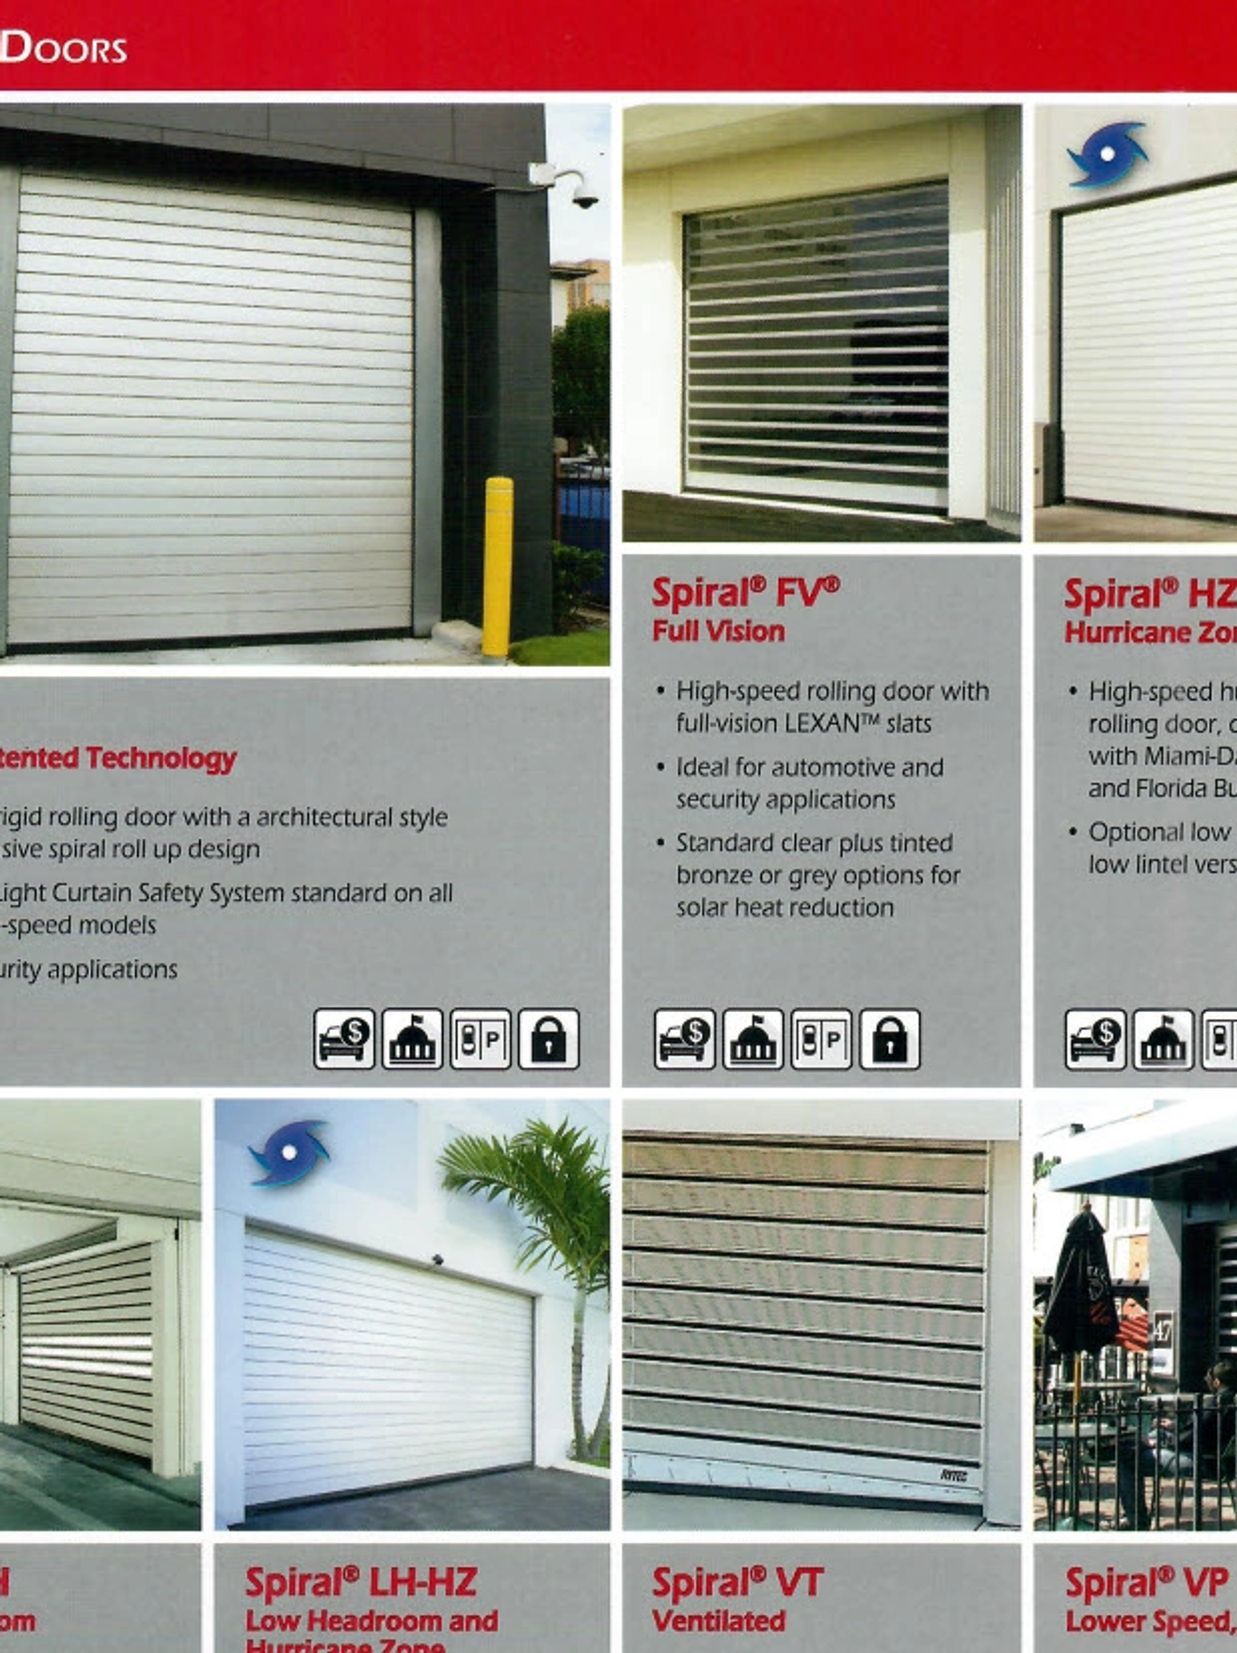 Select from Rytec Spiral Doors